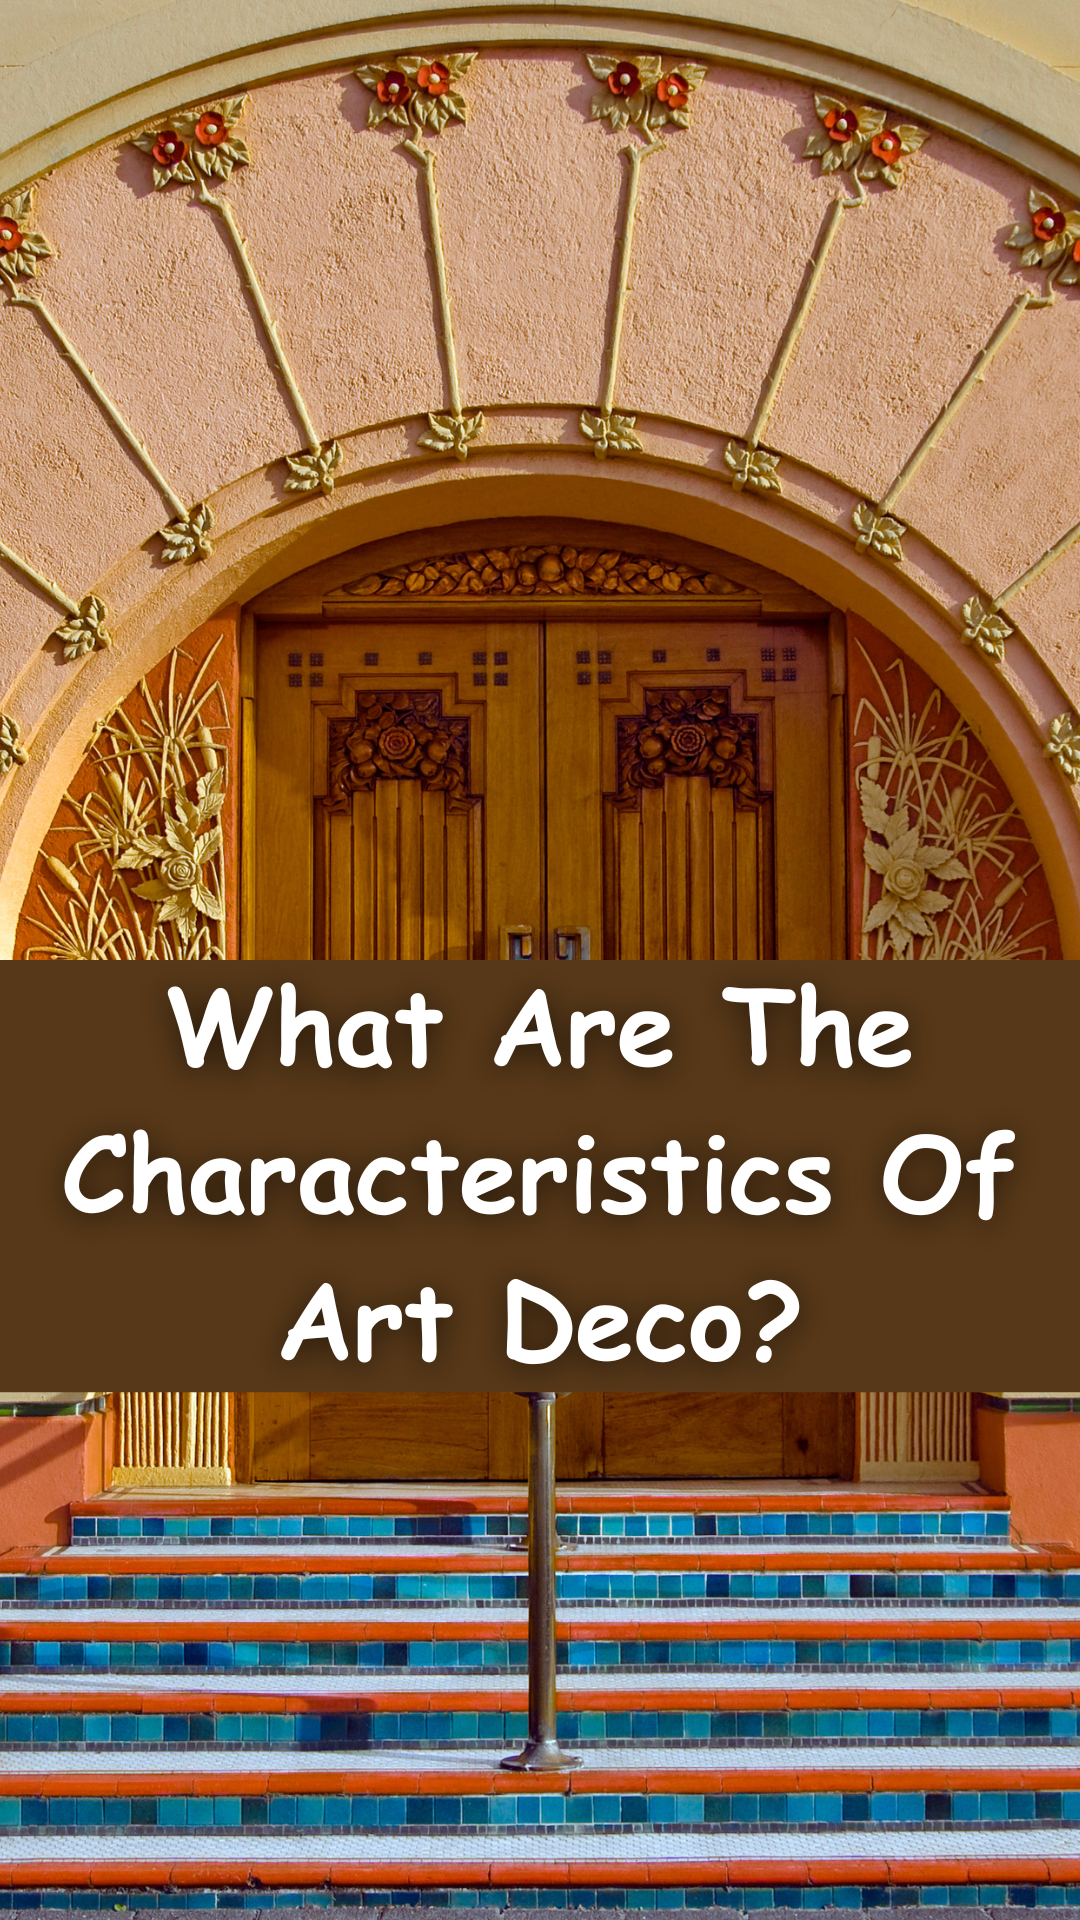 What Are The Characteristics Of Art Deco?